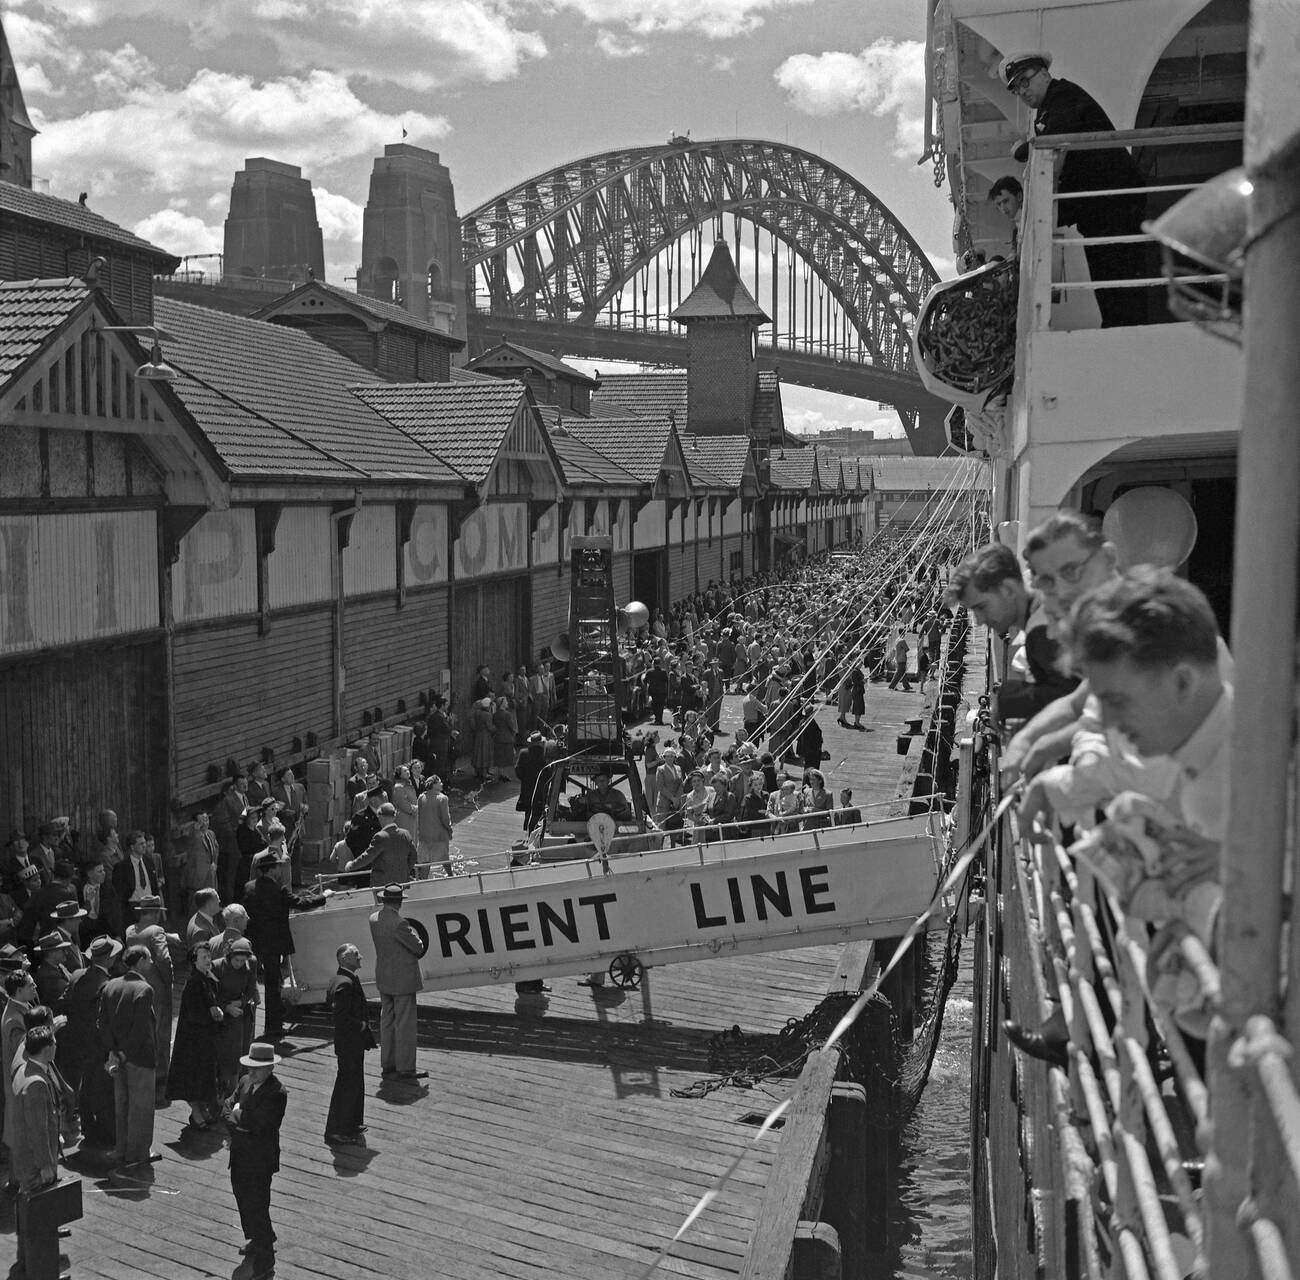 Orient Line passenger ship about to set sail and leave the Overseas Passenger Terminal at Circular Quay, Sydney Harbour, 1960s